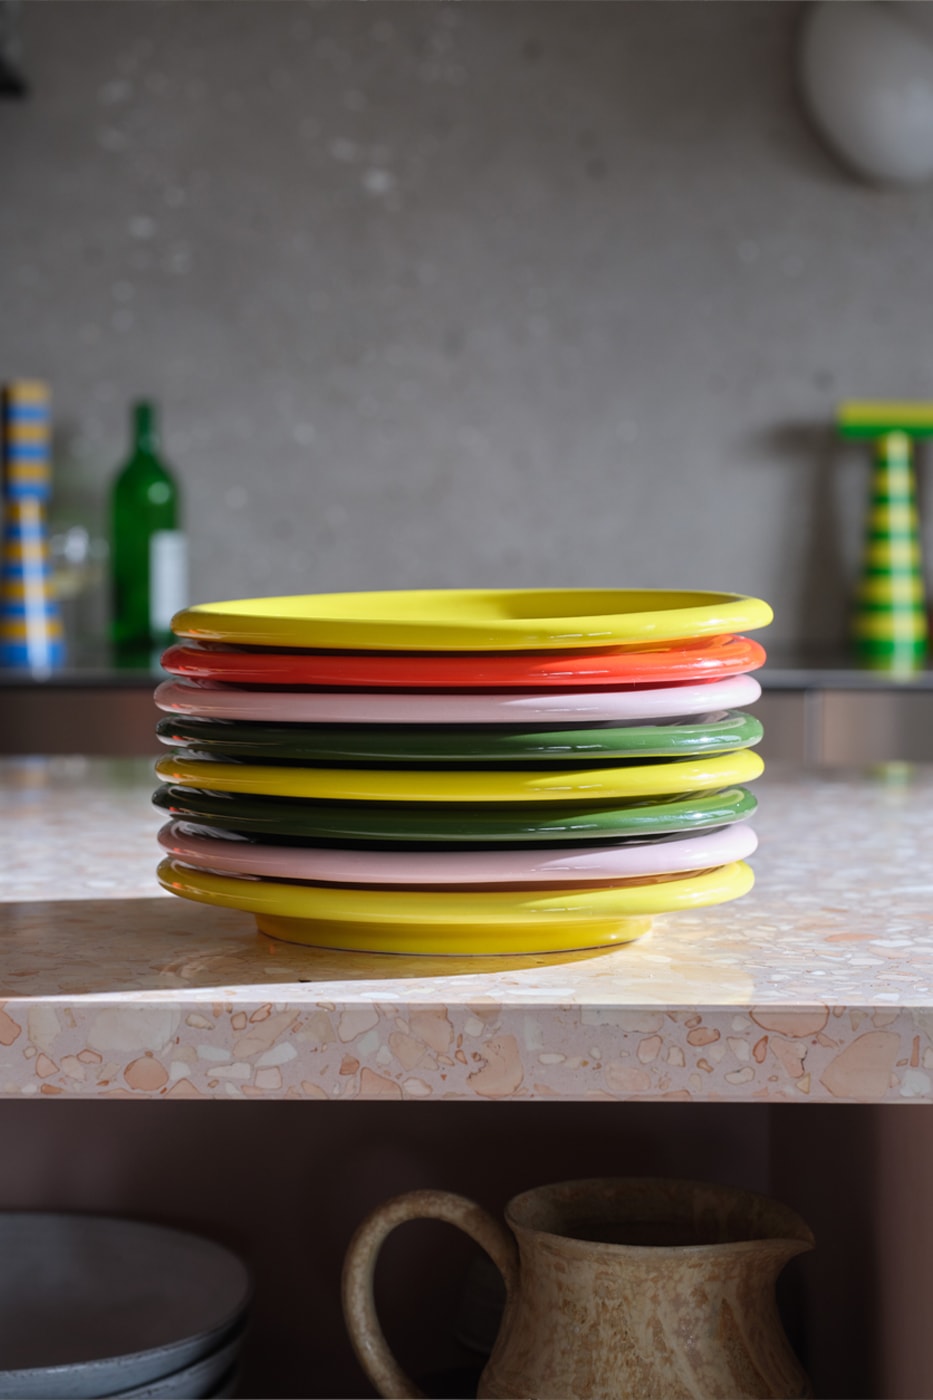 Hem Previews Debut Tableware and Accessories Collection